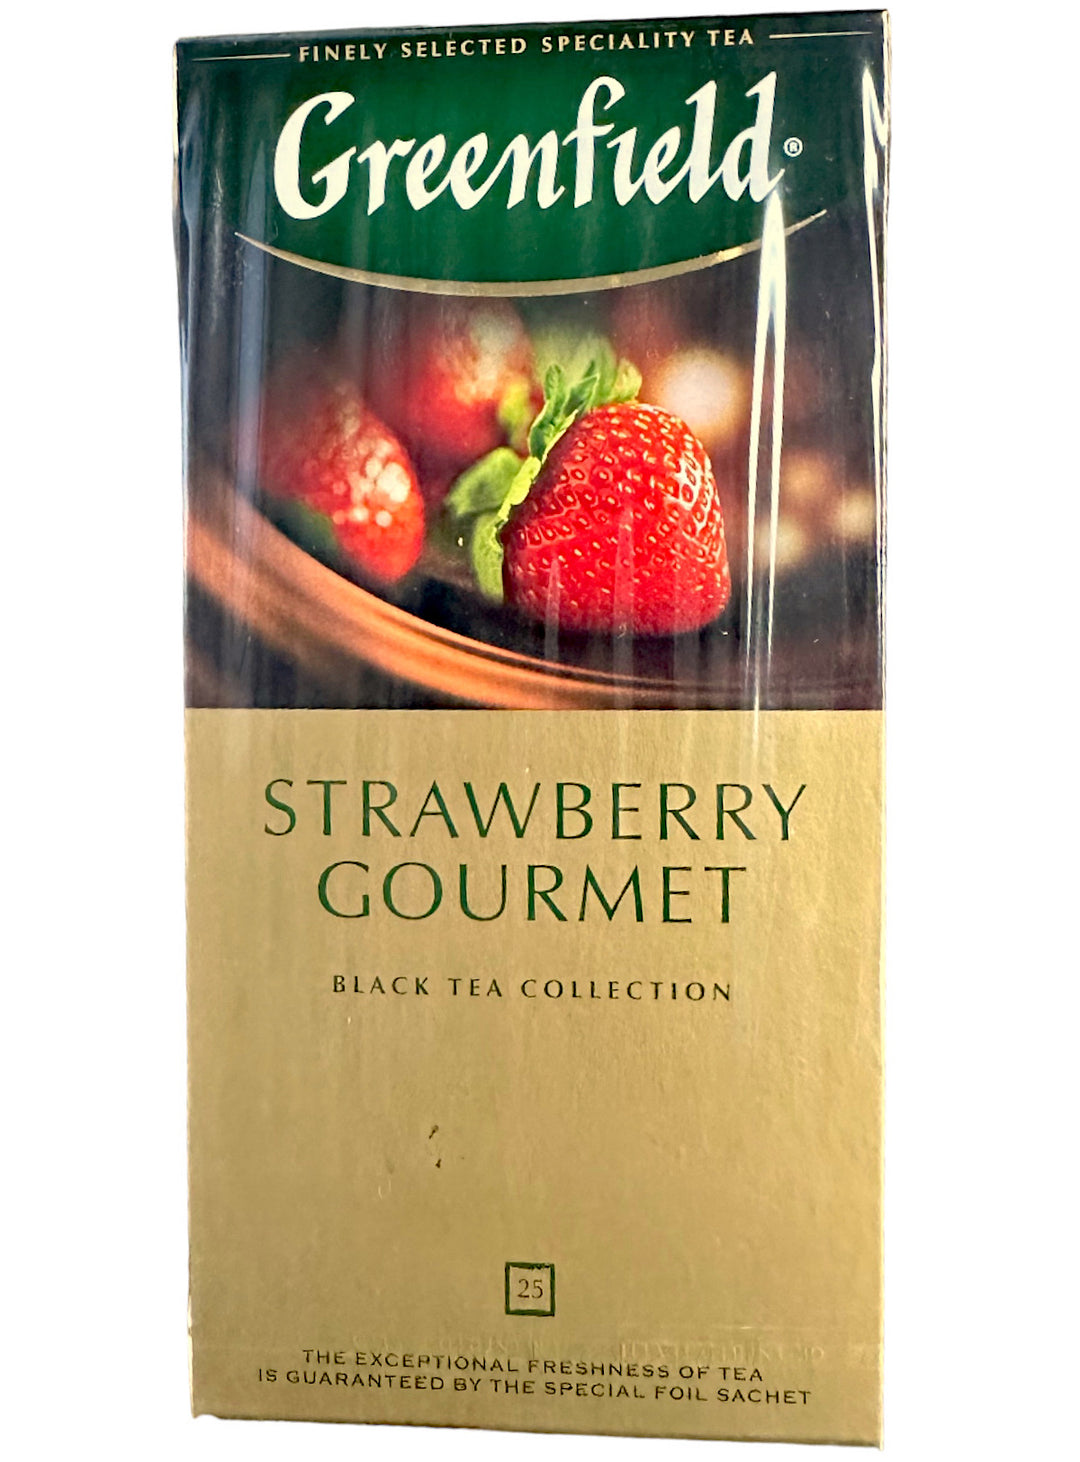 Strawberry Gourmet - Greenfield - 20 bags